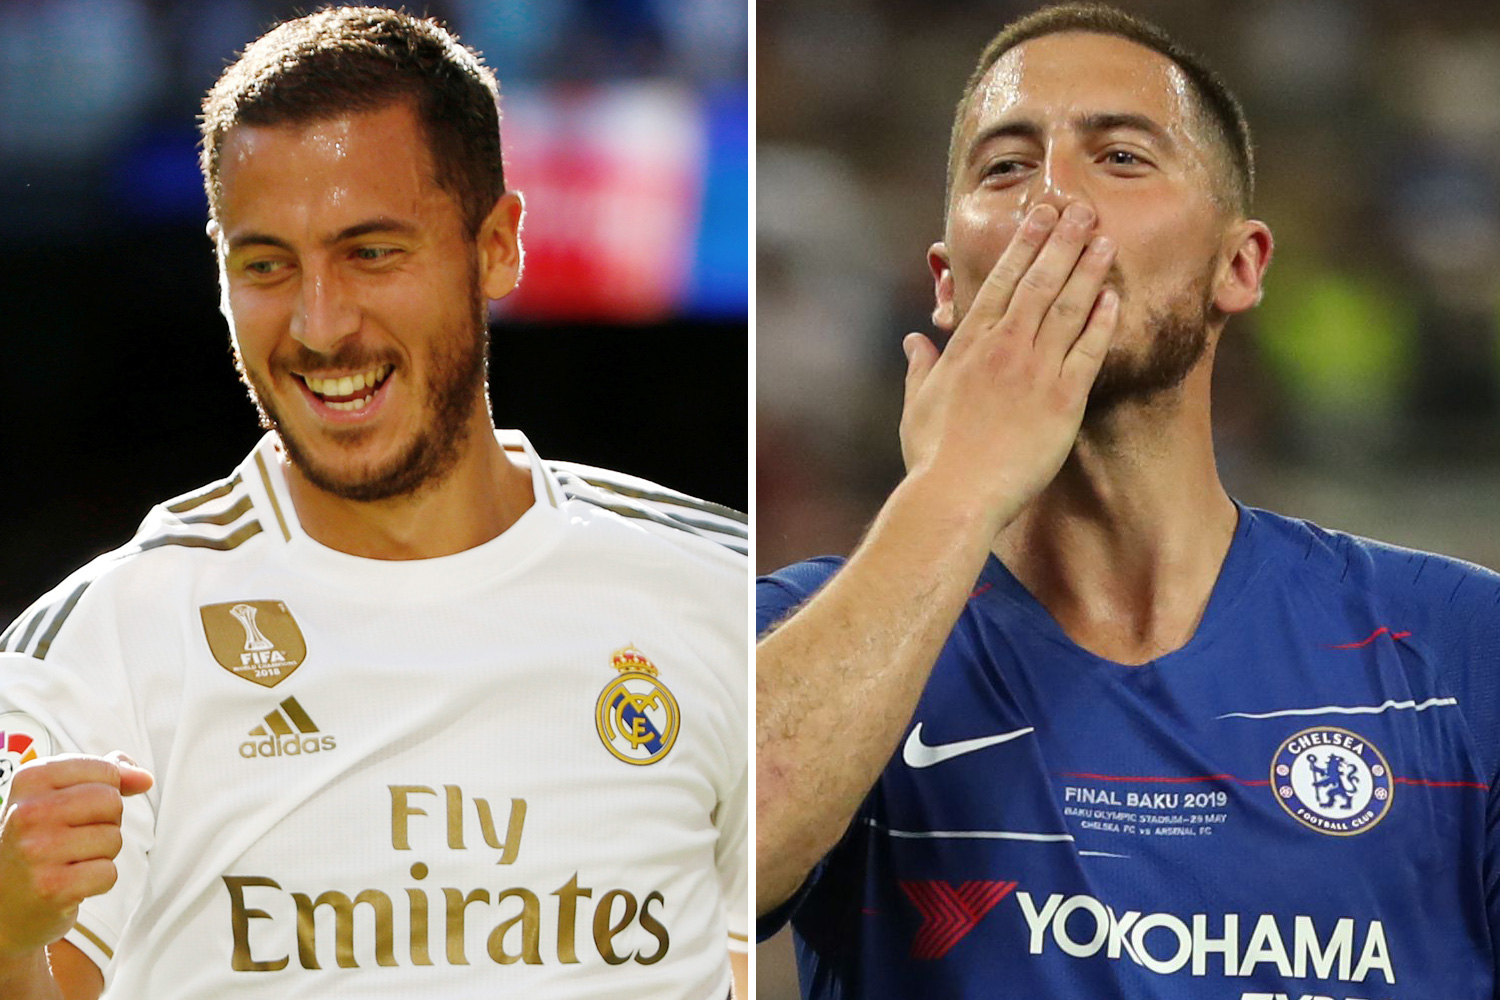 Eden Hazard makes sensational vow to return to Chelsea when he is finished with Real Madrid | The Sun